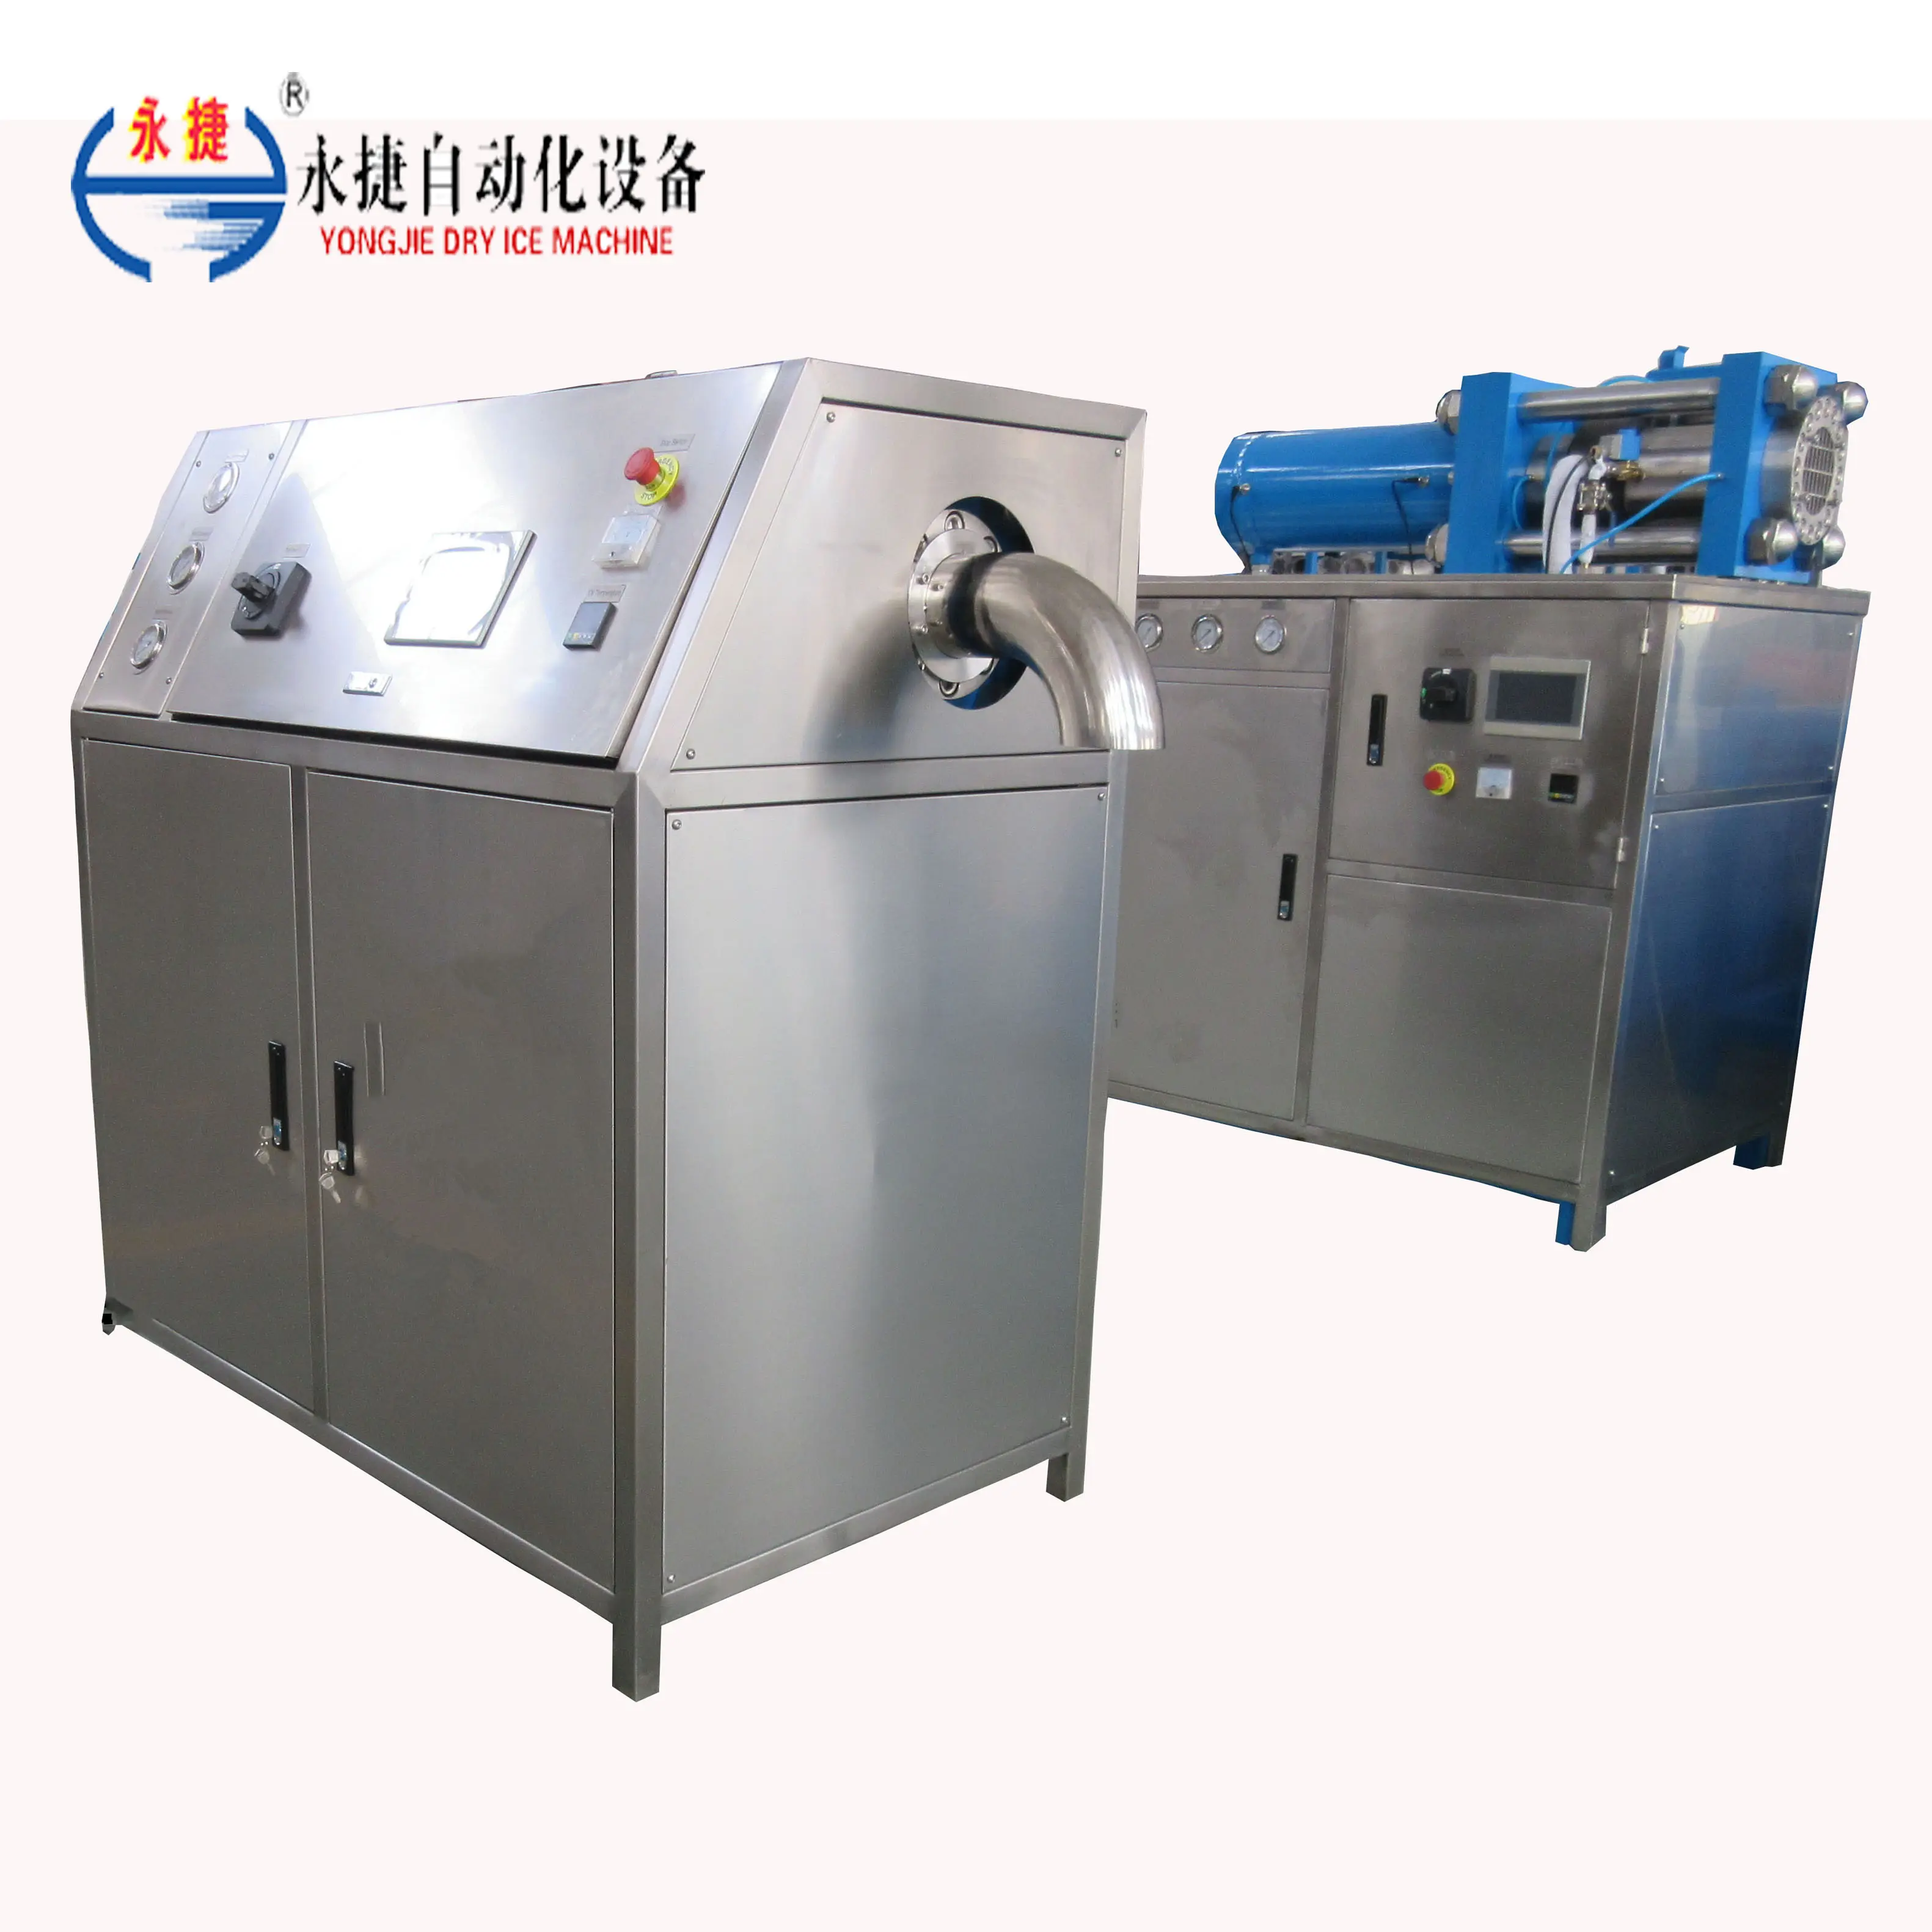 hot sale! full-automatic liquid co2 dry ice block machine dry ice press for sale/dry ice maker